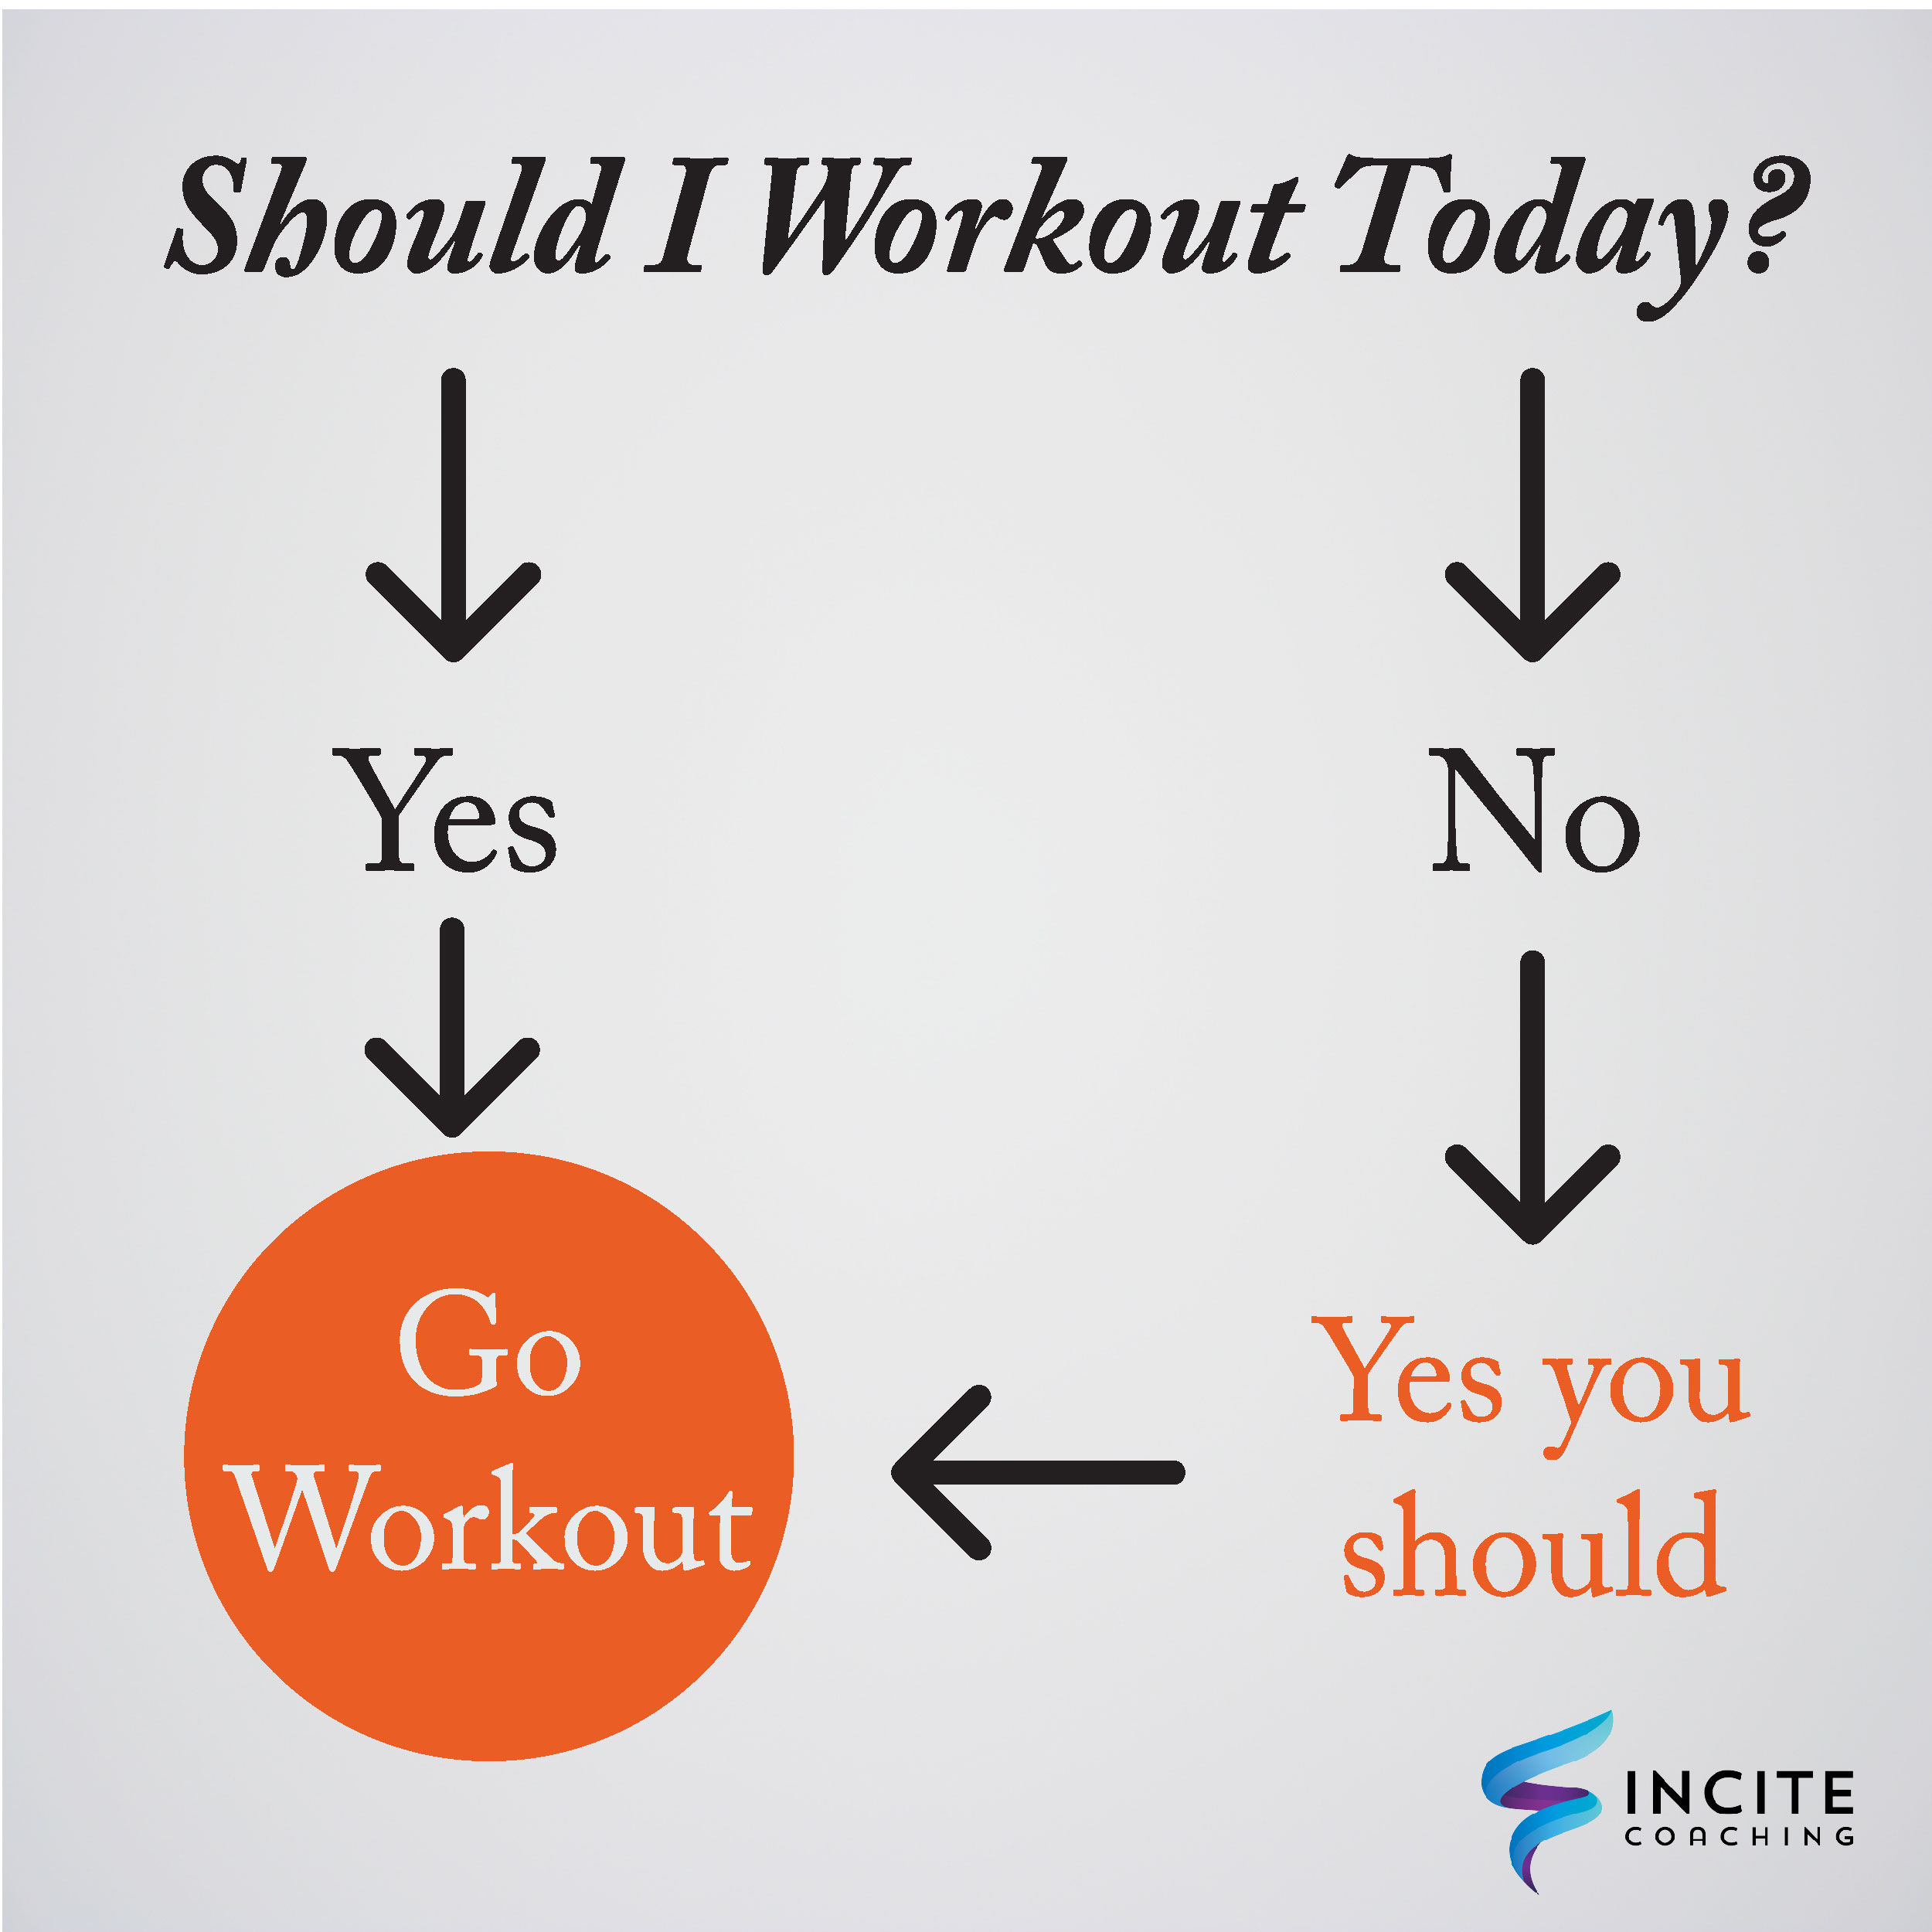 Should I Work Out Today?